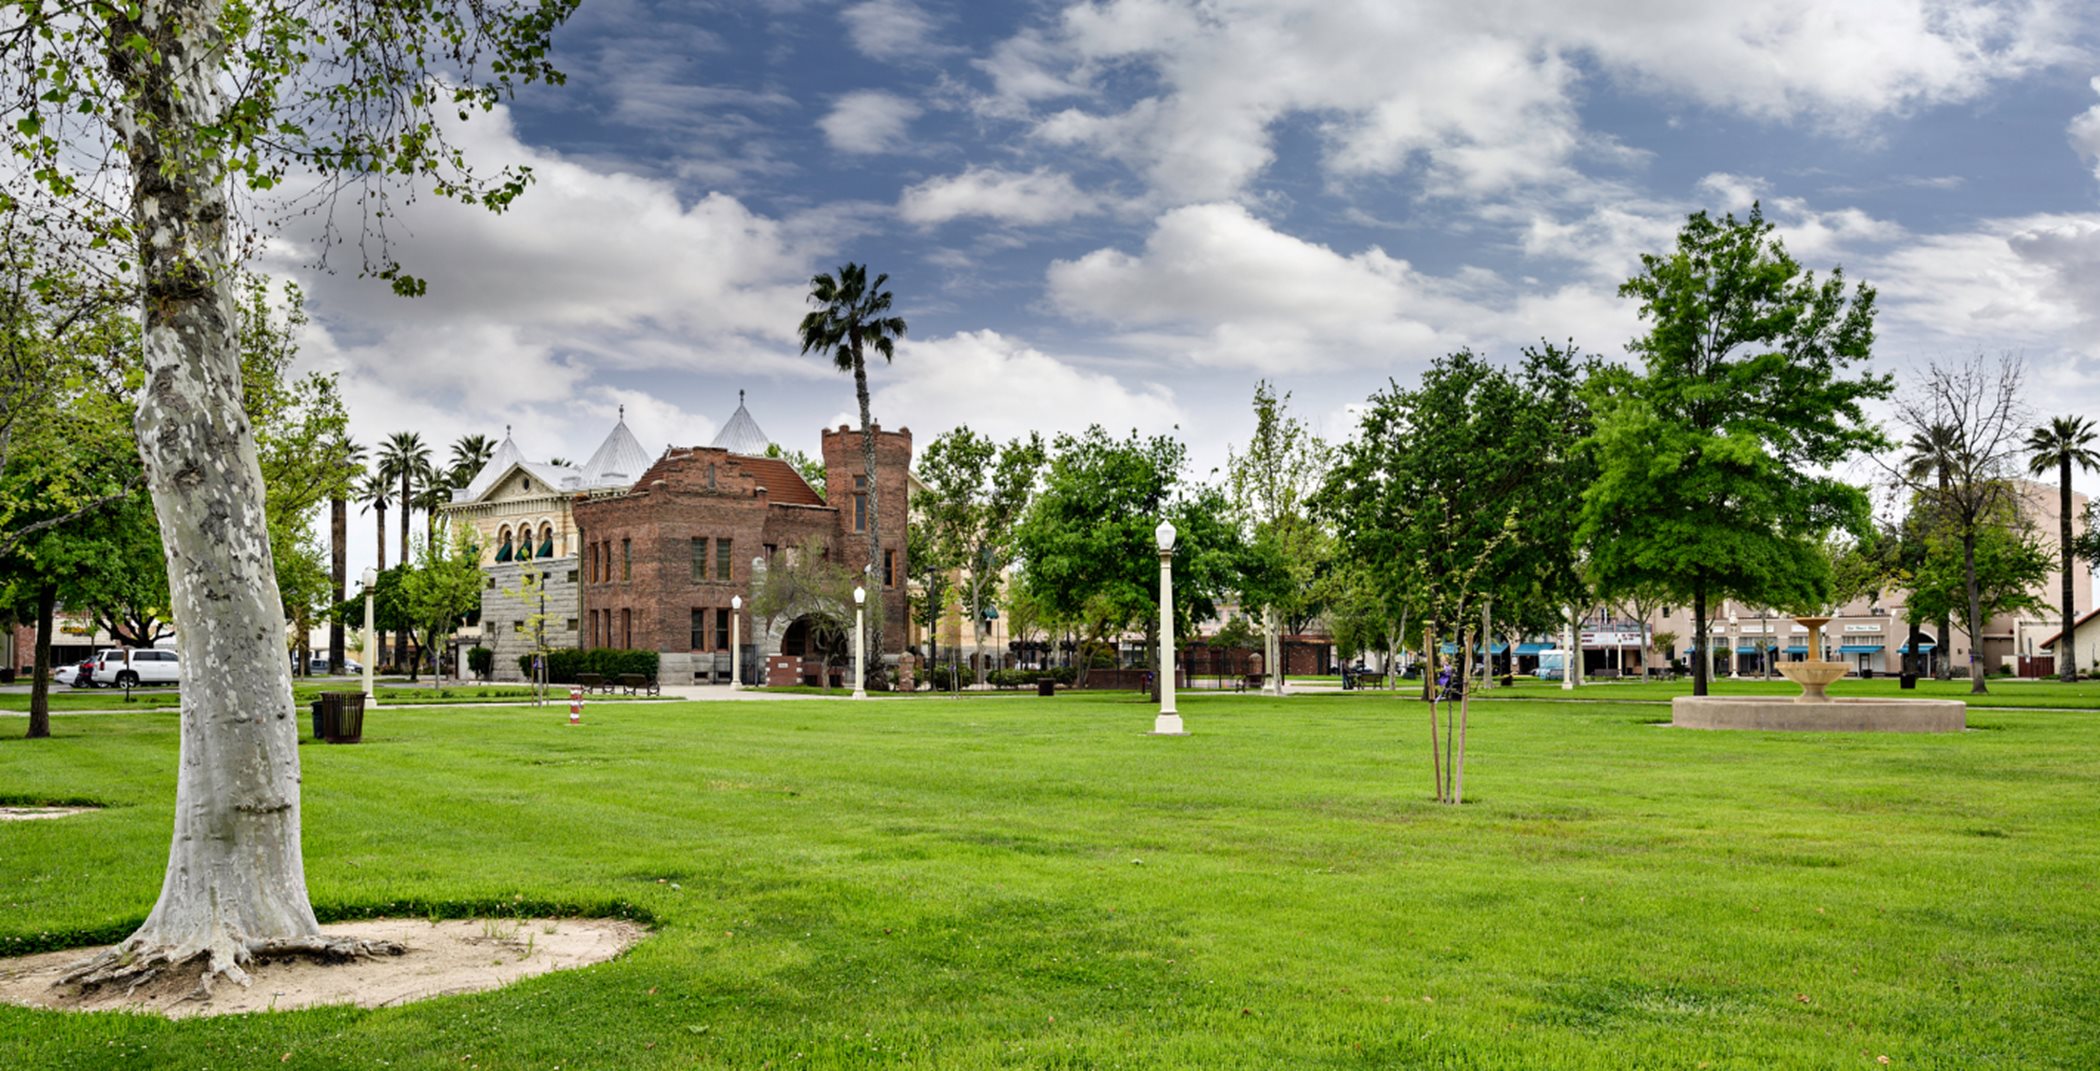 Civic Center park exterior with trees